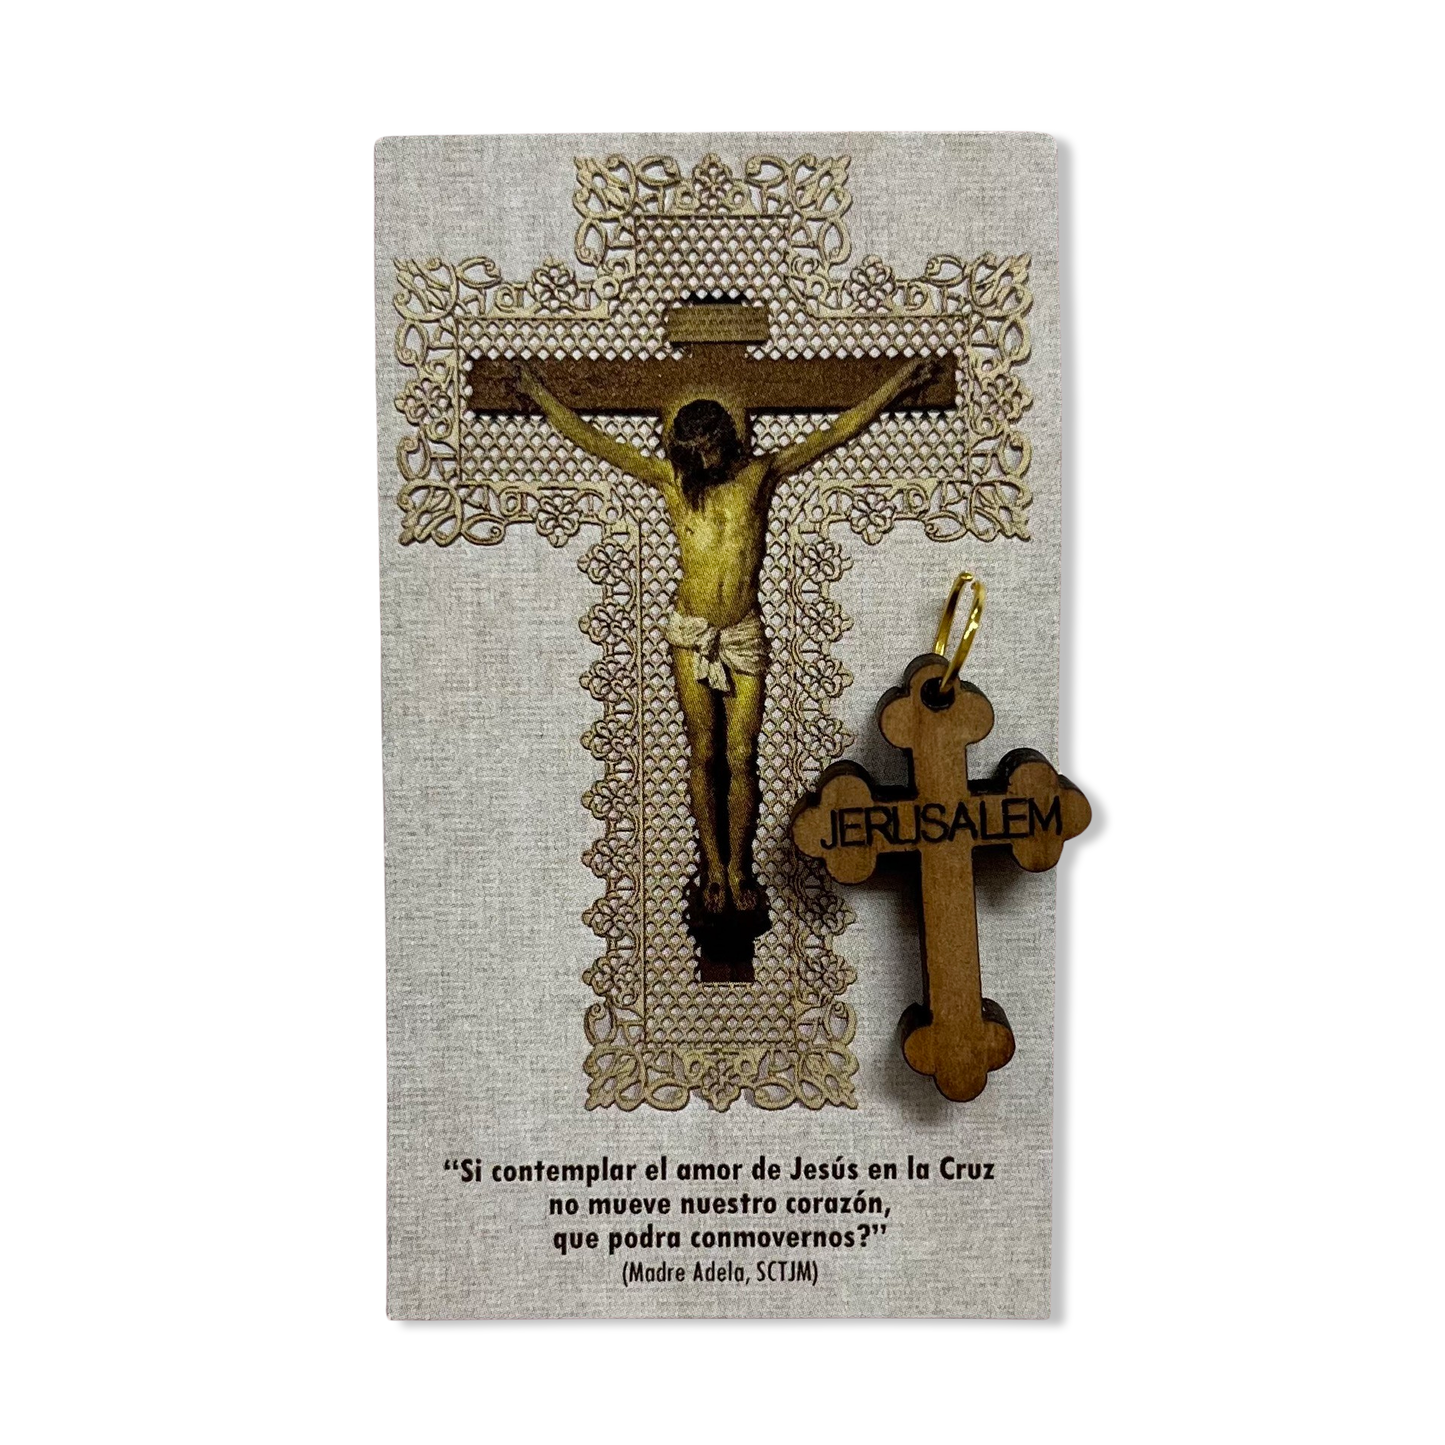 Budded Cross with Way of the Cross Holy Card touched to the Place of the Crucifixion